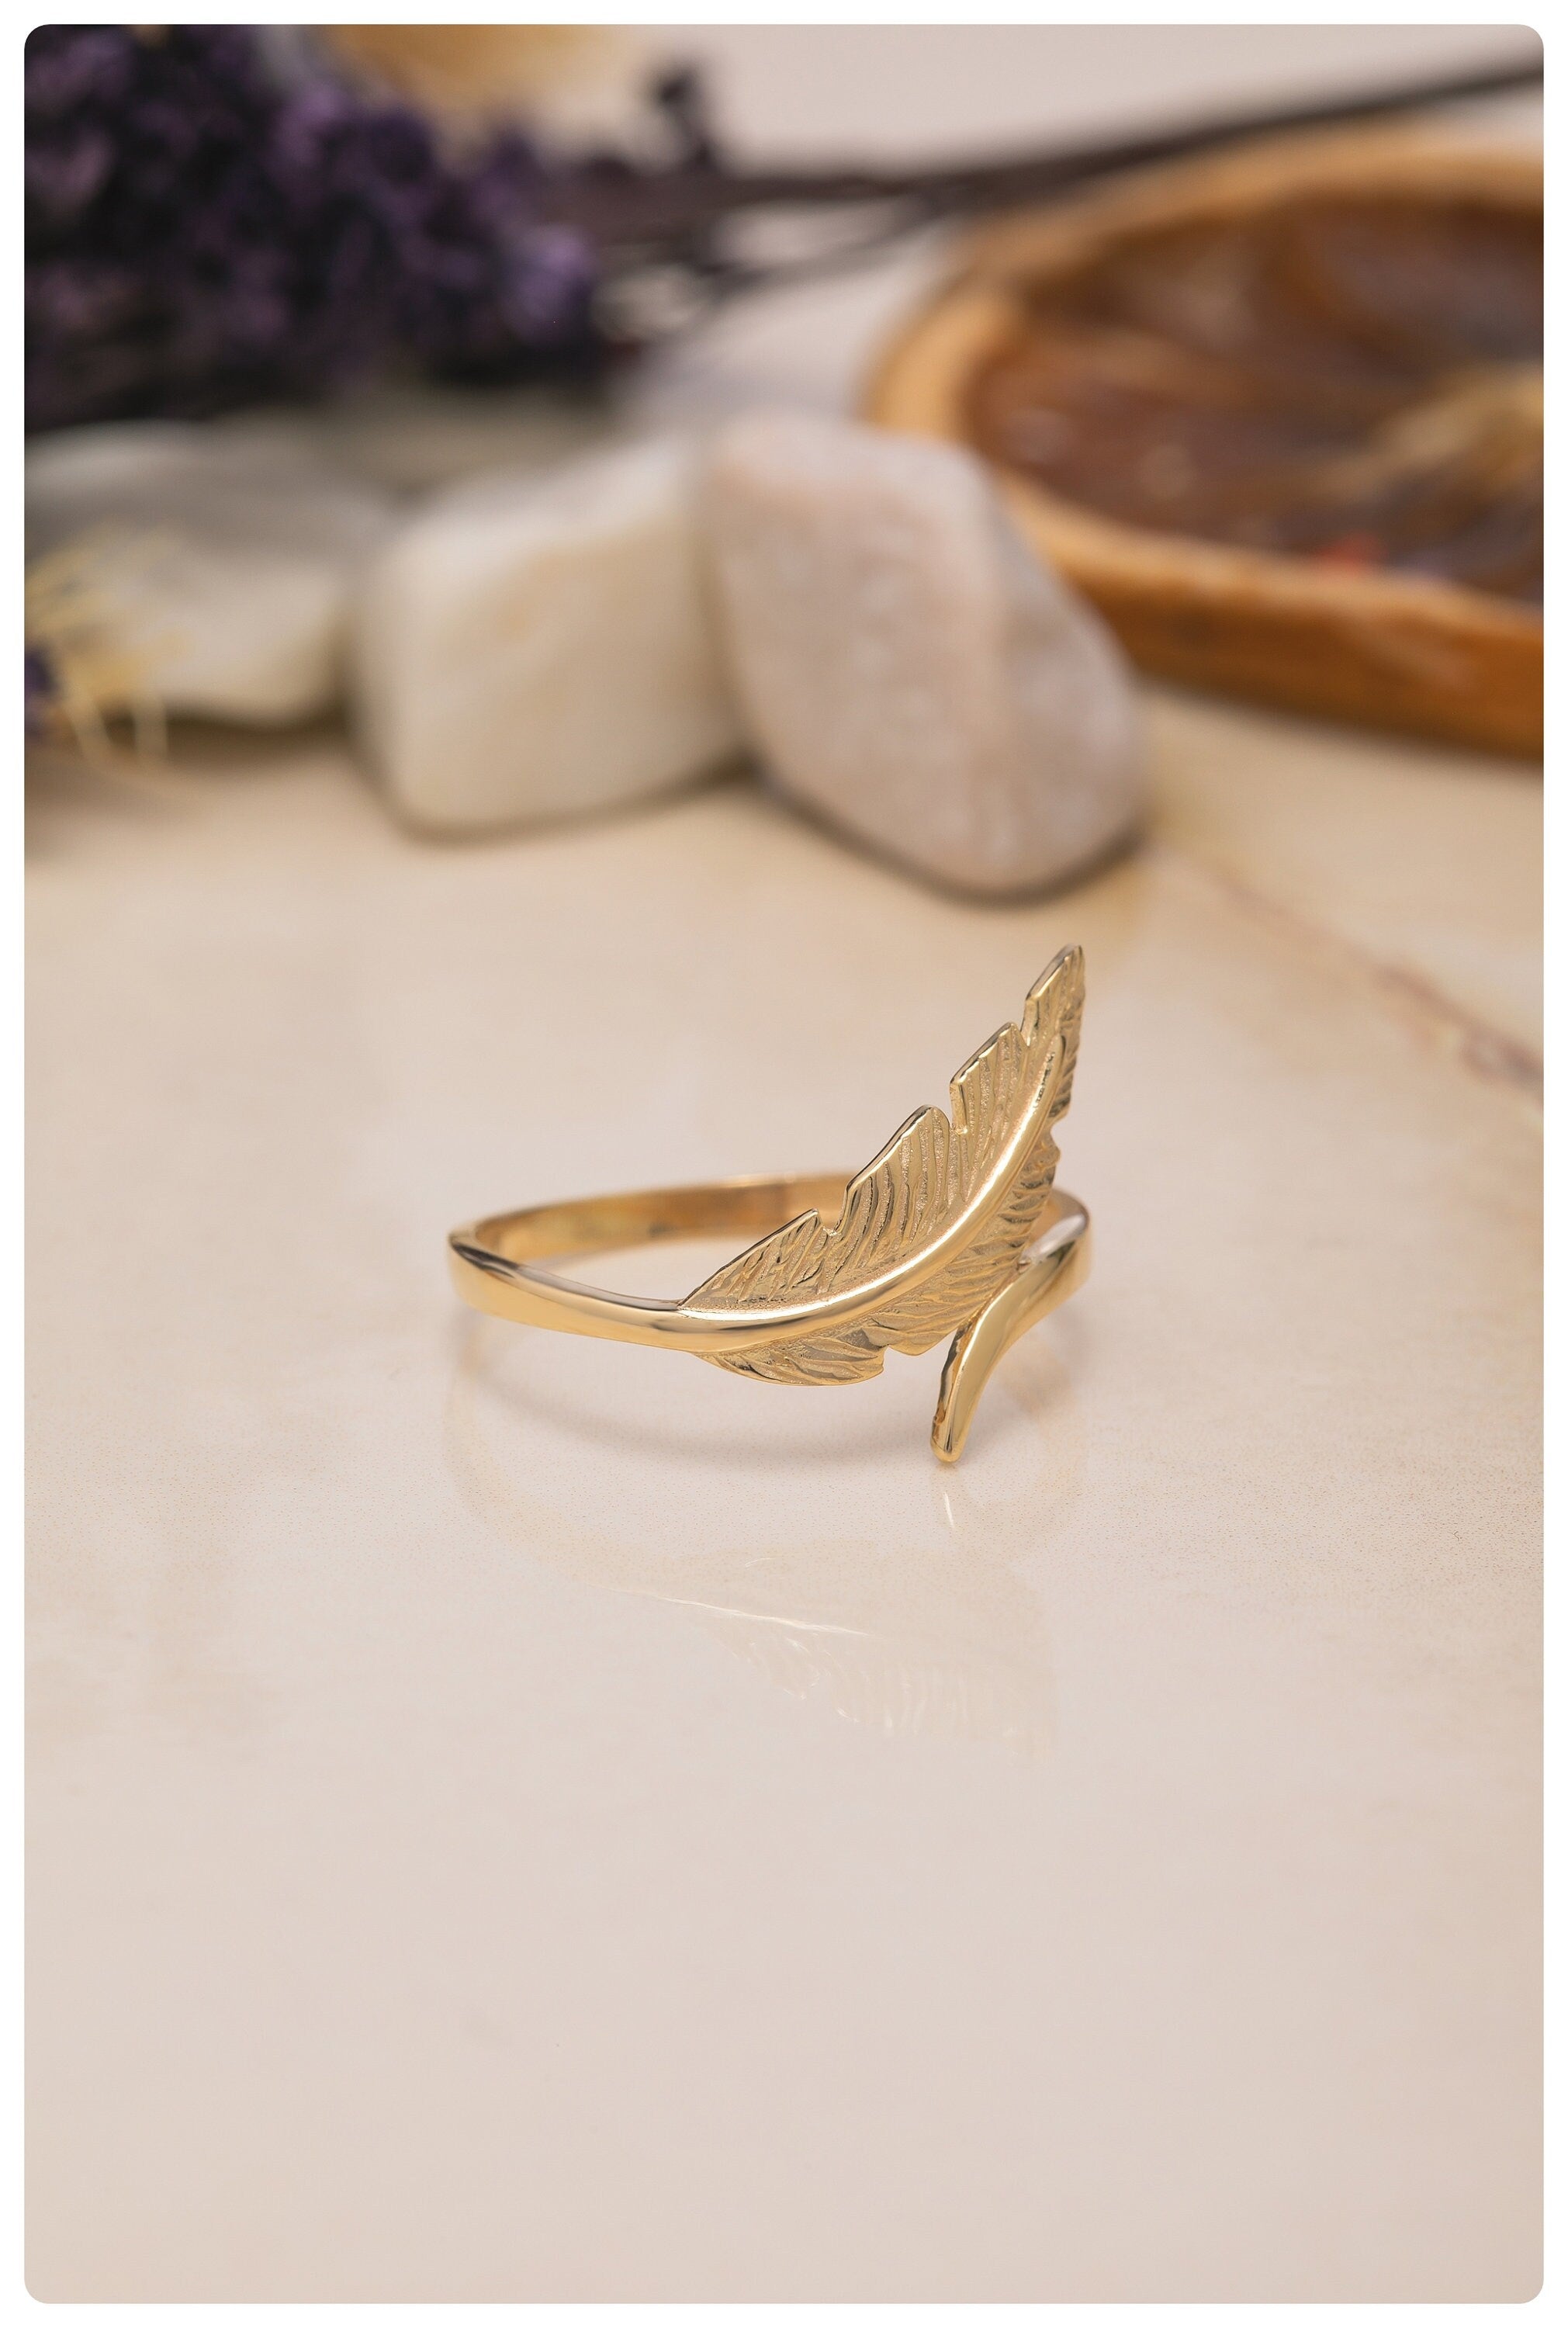 14K Gold Oak Leaf Ring, 925 Sterling Silver Minimalist Nature-Inspired Jewelry, Crystal Open Leaf Ring, Botanical Women's Dainty Leaf Ring